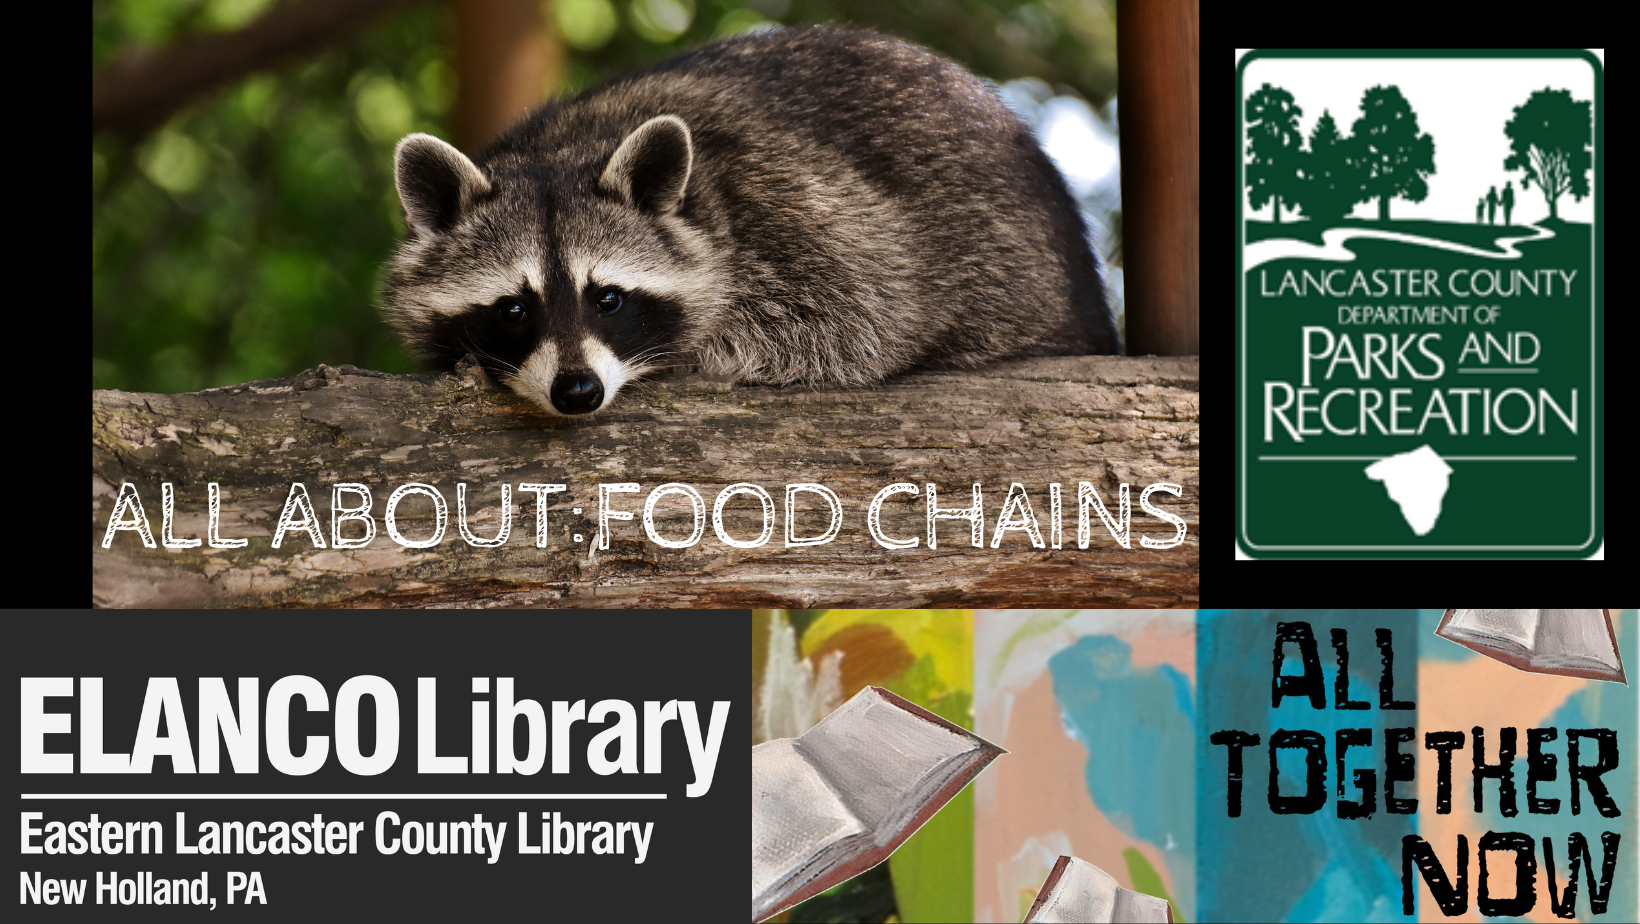 All About Food Chains with Lancaster County Parks and Recreation